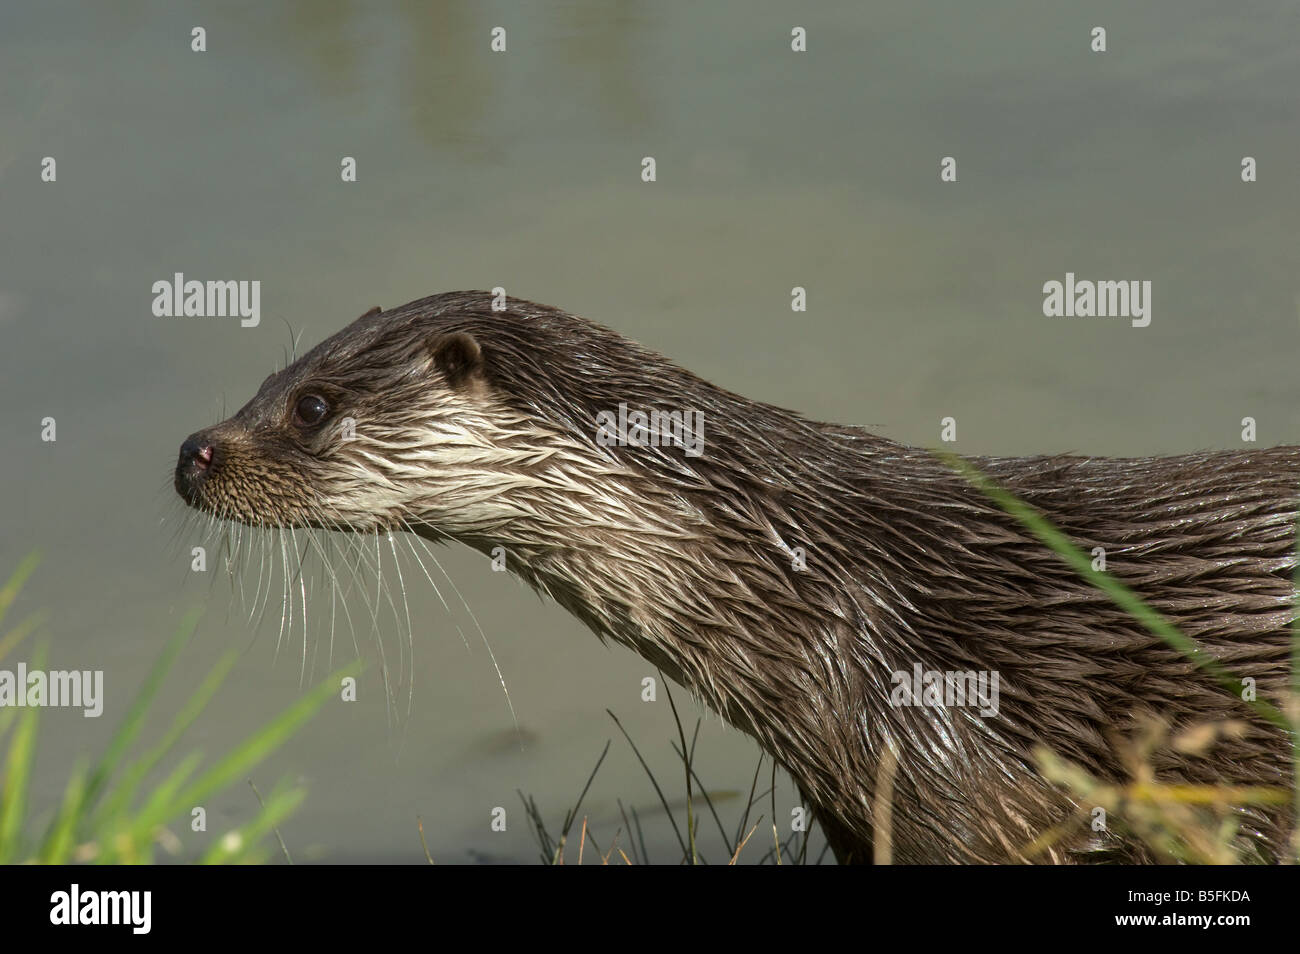 Alert European otter Lutra lutra with wet fur after coming out of water showing whiskers or vibrissae Stock Photo